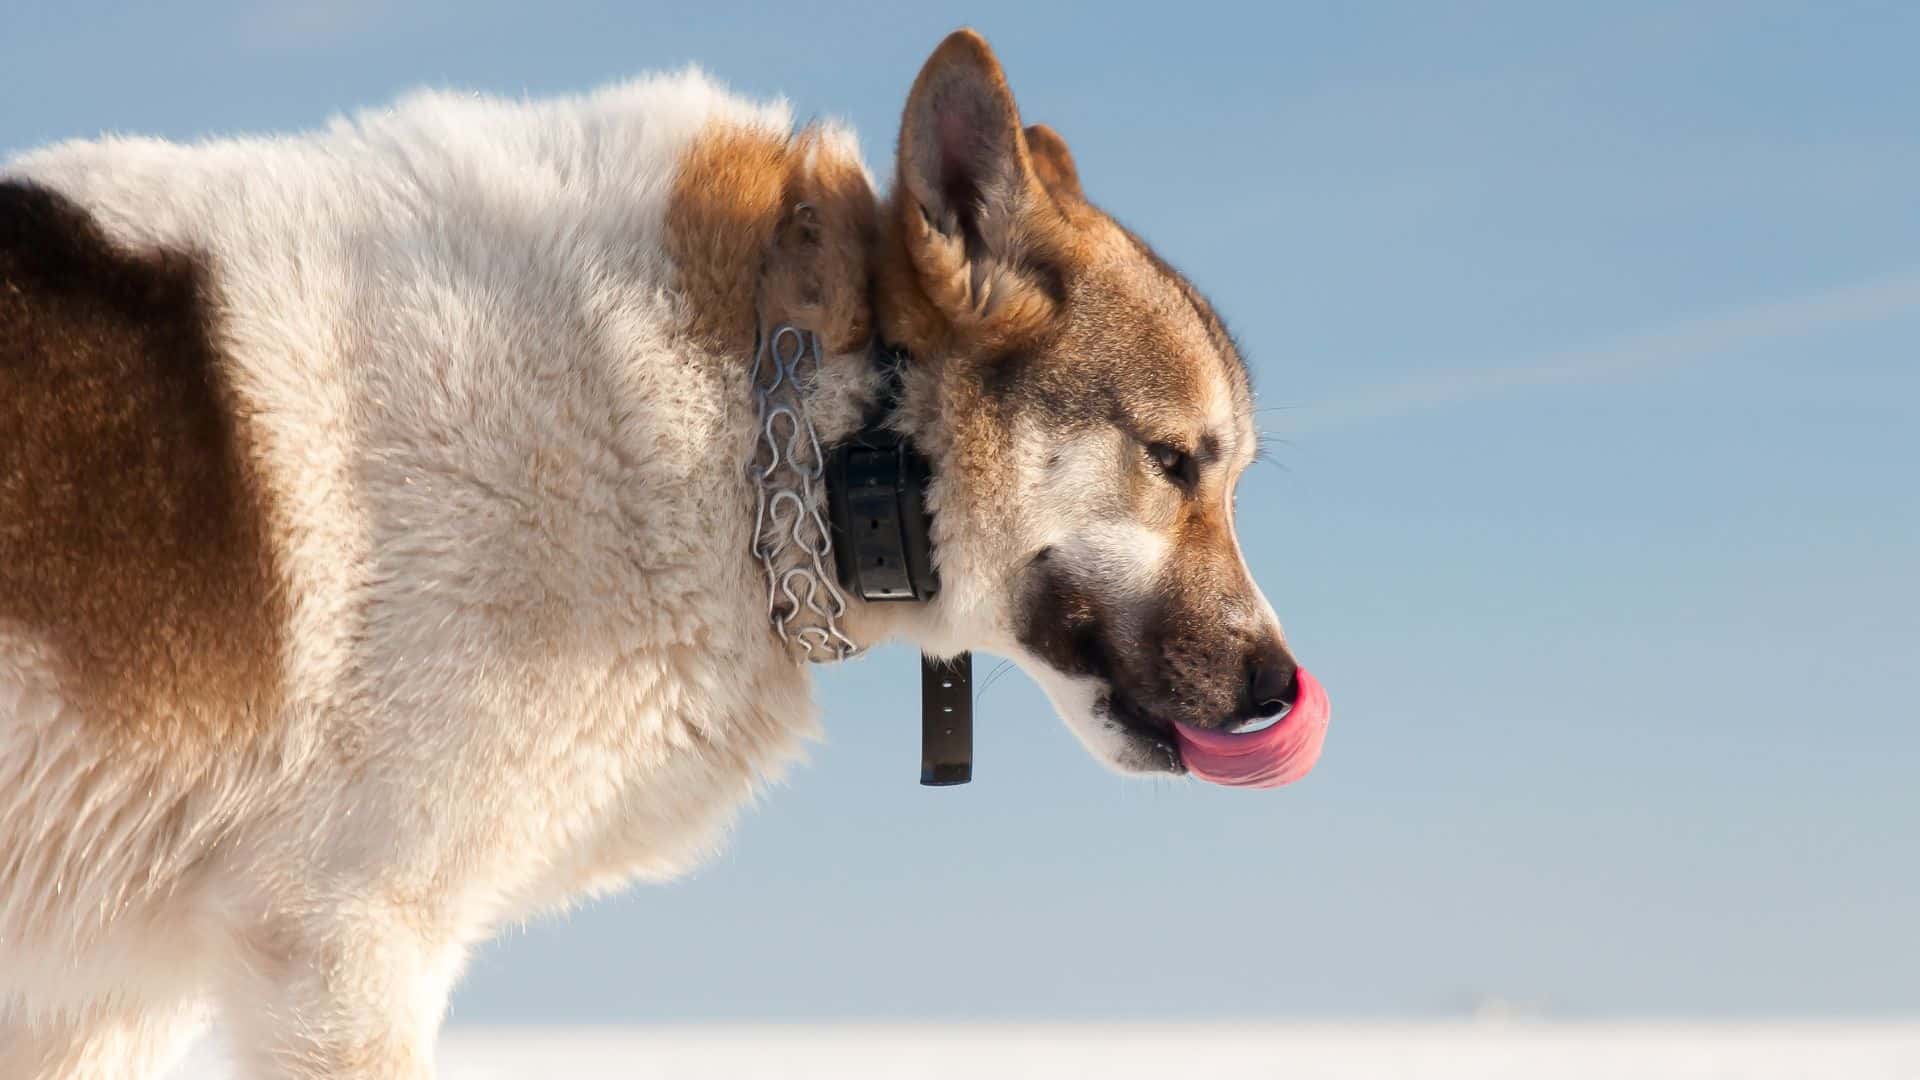 Dog behavior can be improved using shock collars